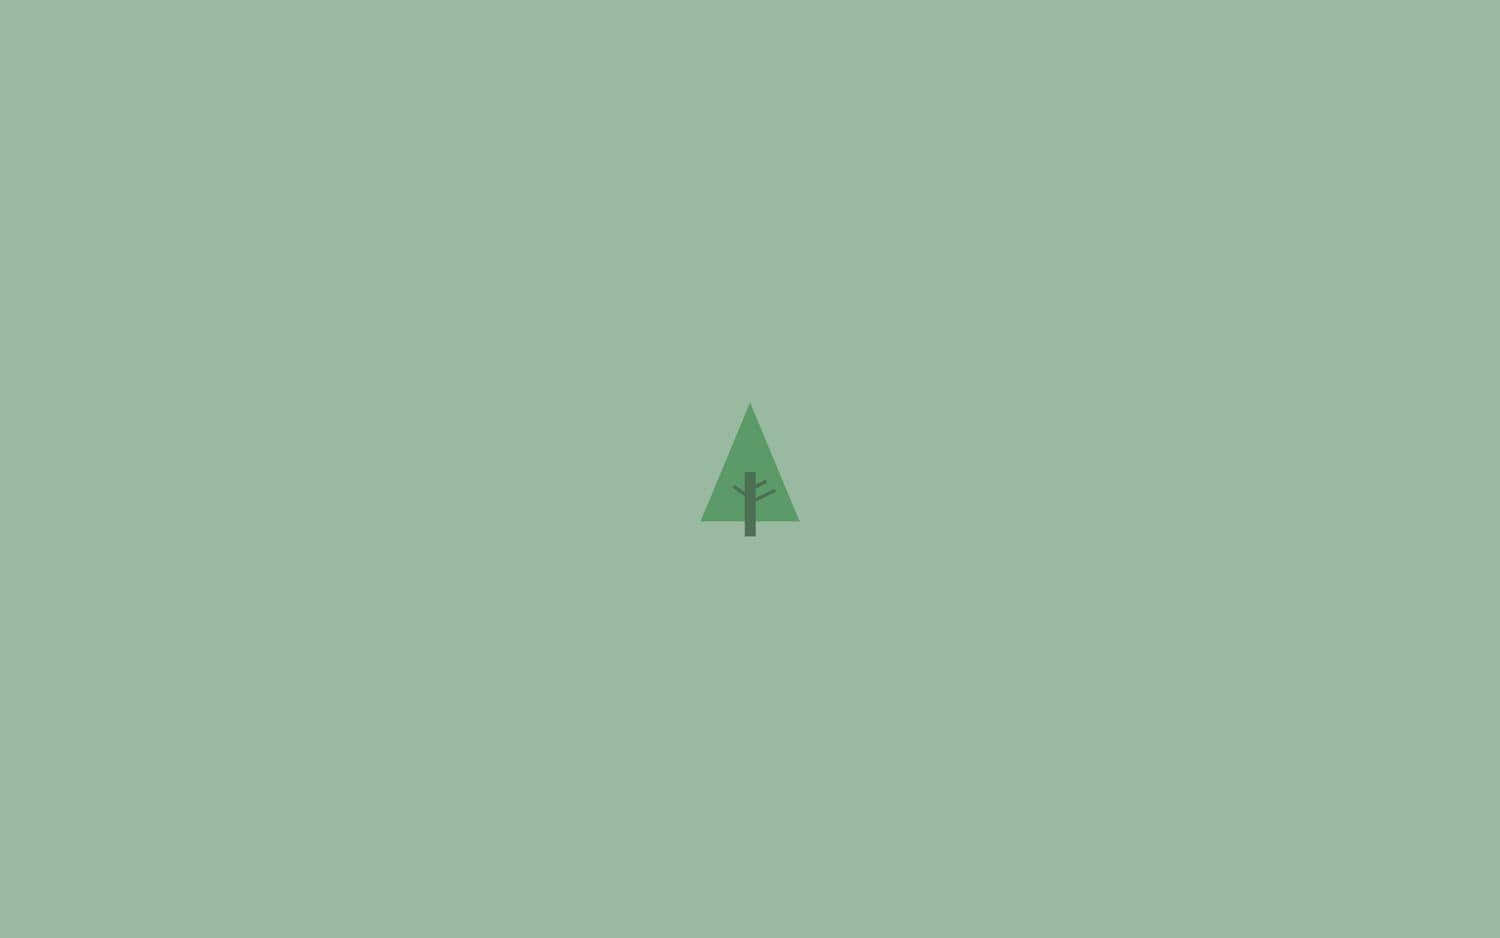 Minimalist Aesthetic Green Pine Tree Pictures 1500 x 938 Picture